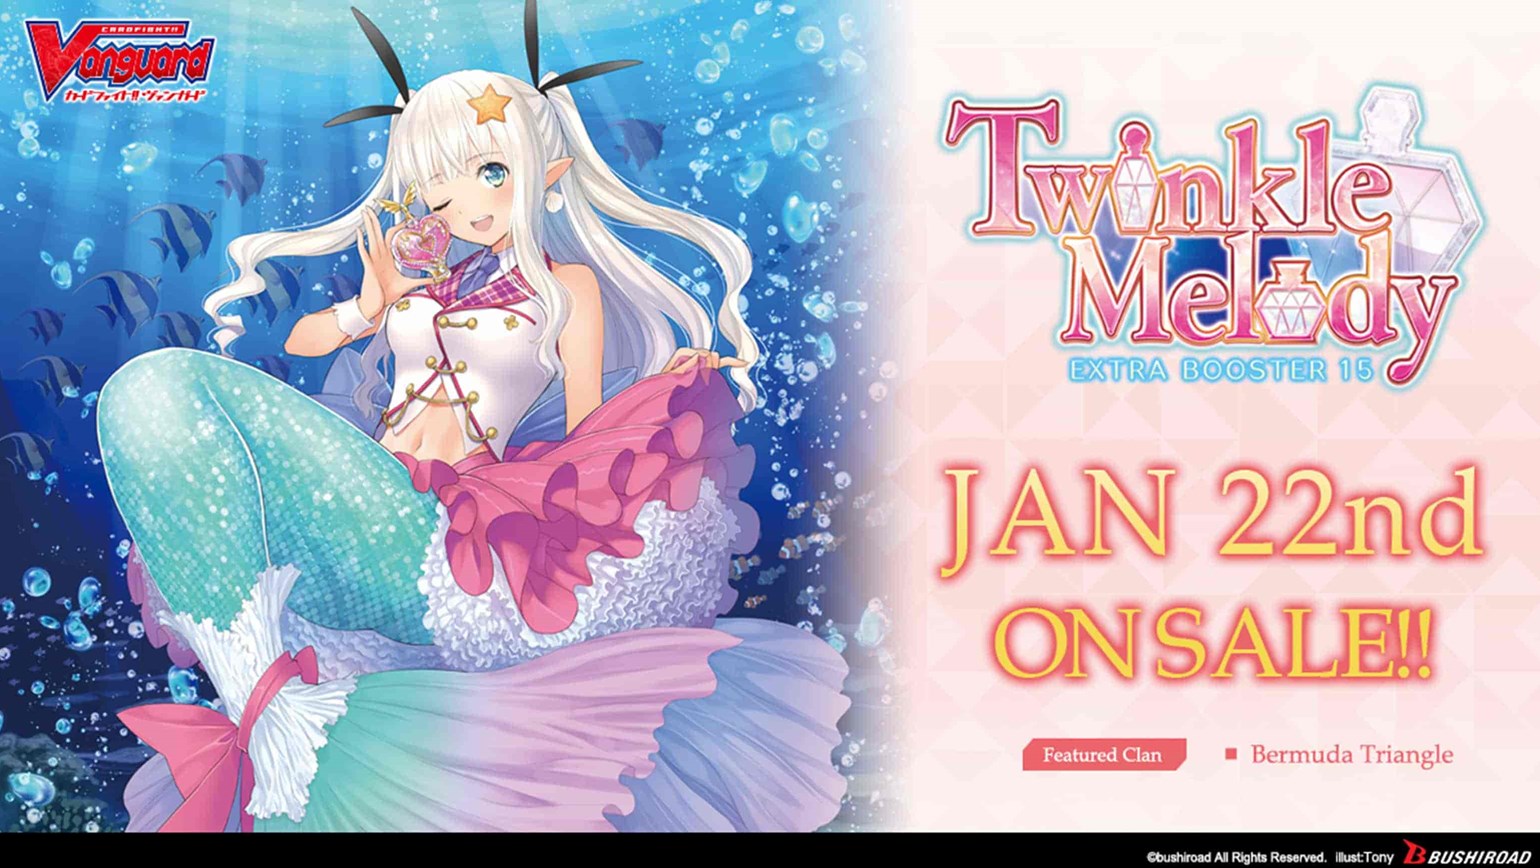 New English Edition Extra Booster 15: Twinkle Melody is Coming to Stores on January 22nd!